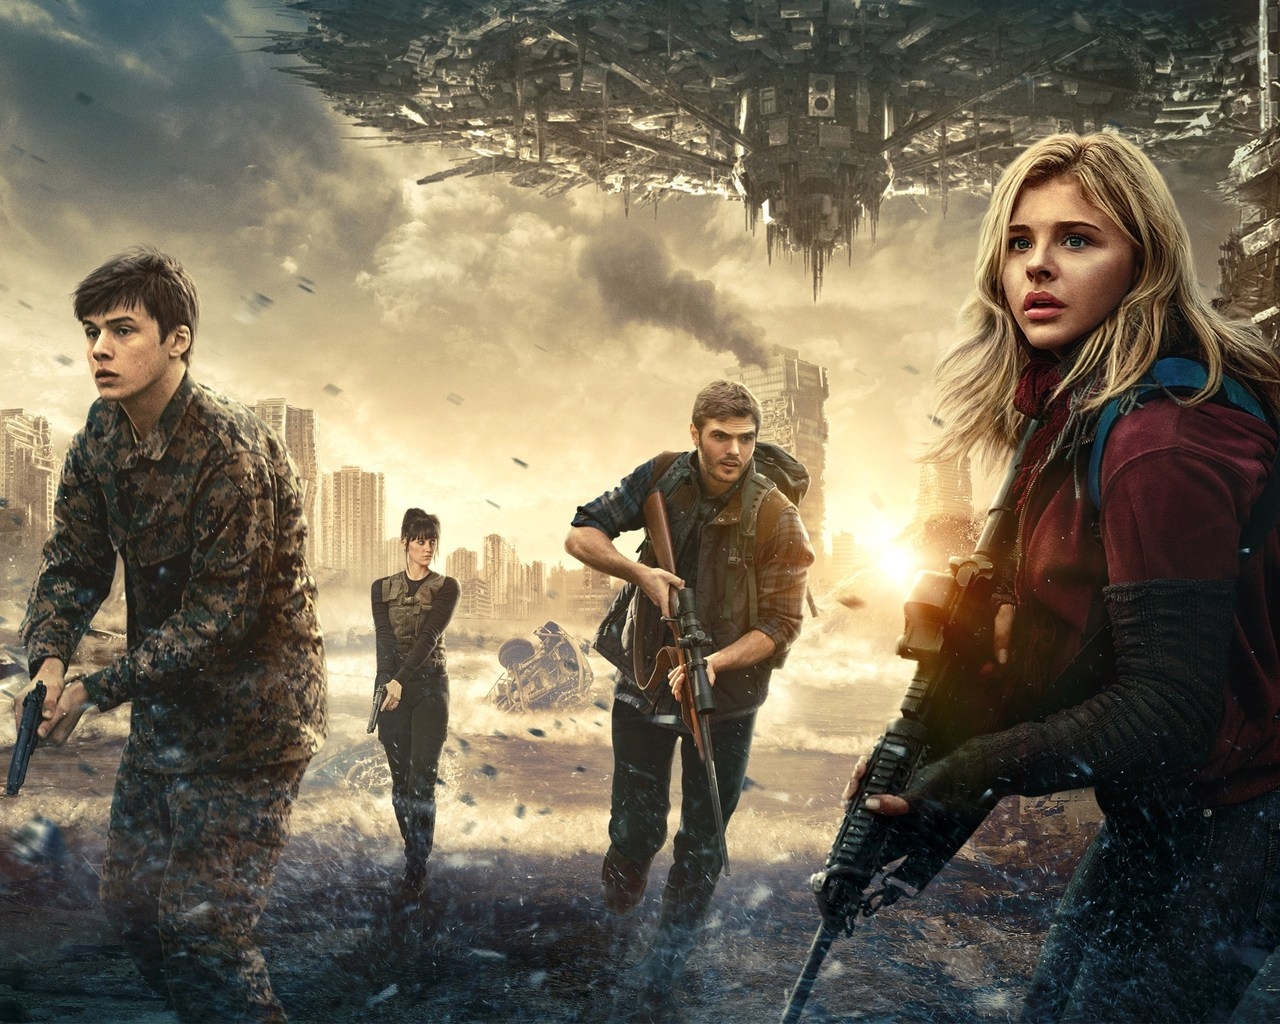 The 5th Wave Film 2016 for 1280 x 1024 resolution